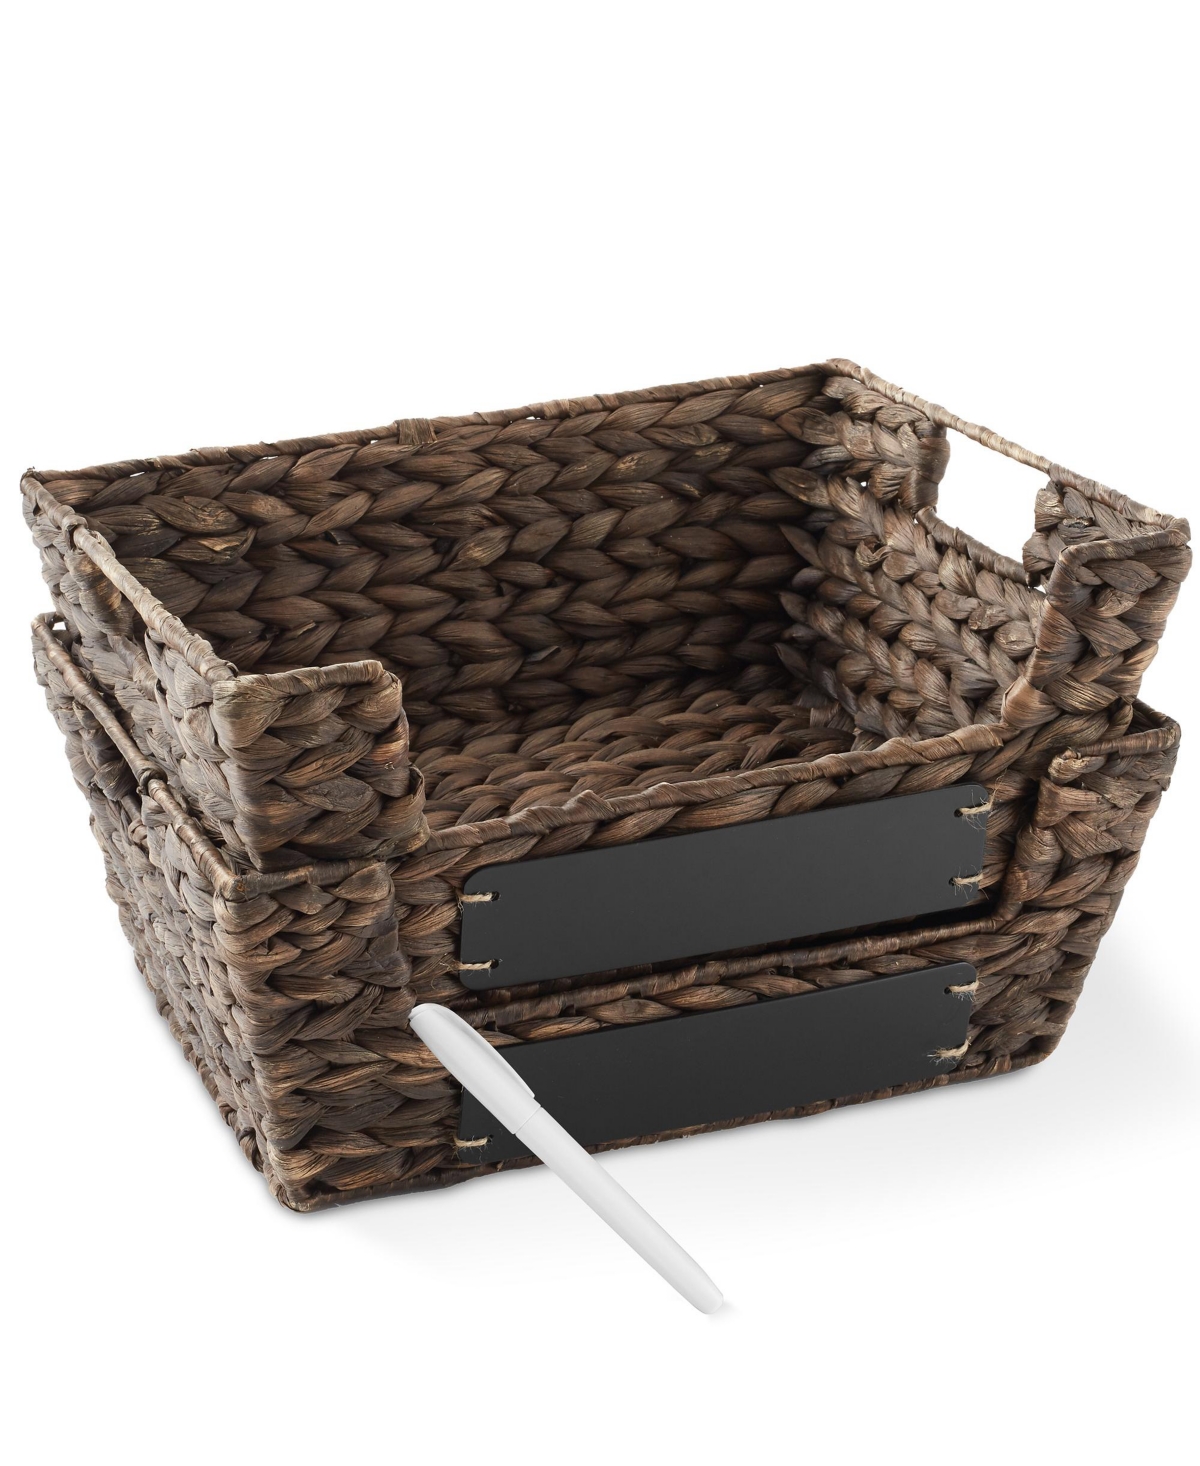 (Set of 2) Water Hyacinth Pantry Baskets with Handles and Chalkboard Labels - Espresso, Wide Woven Storage Baskets for Kitchen Shelves - Nat